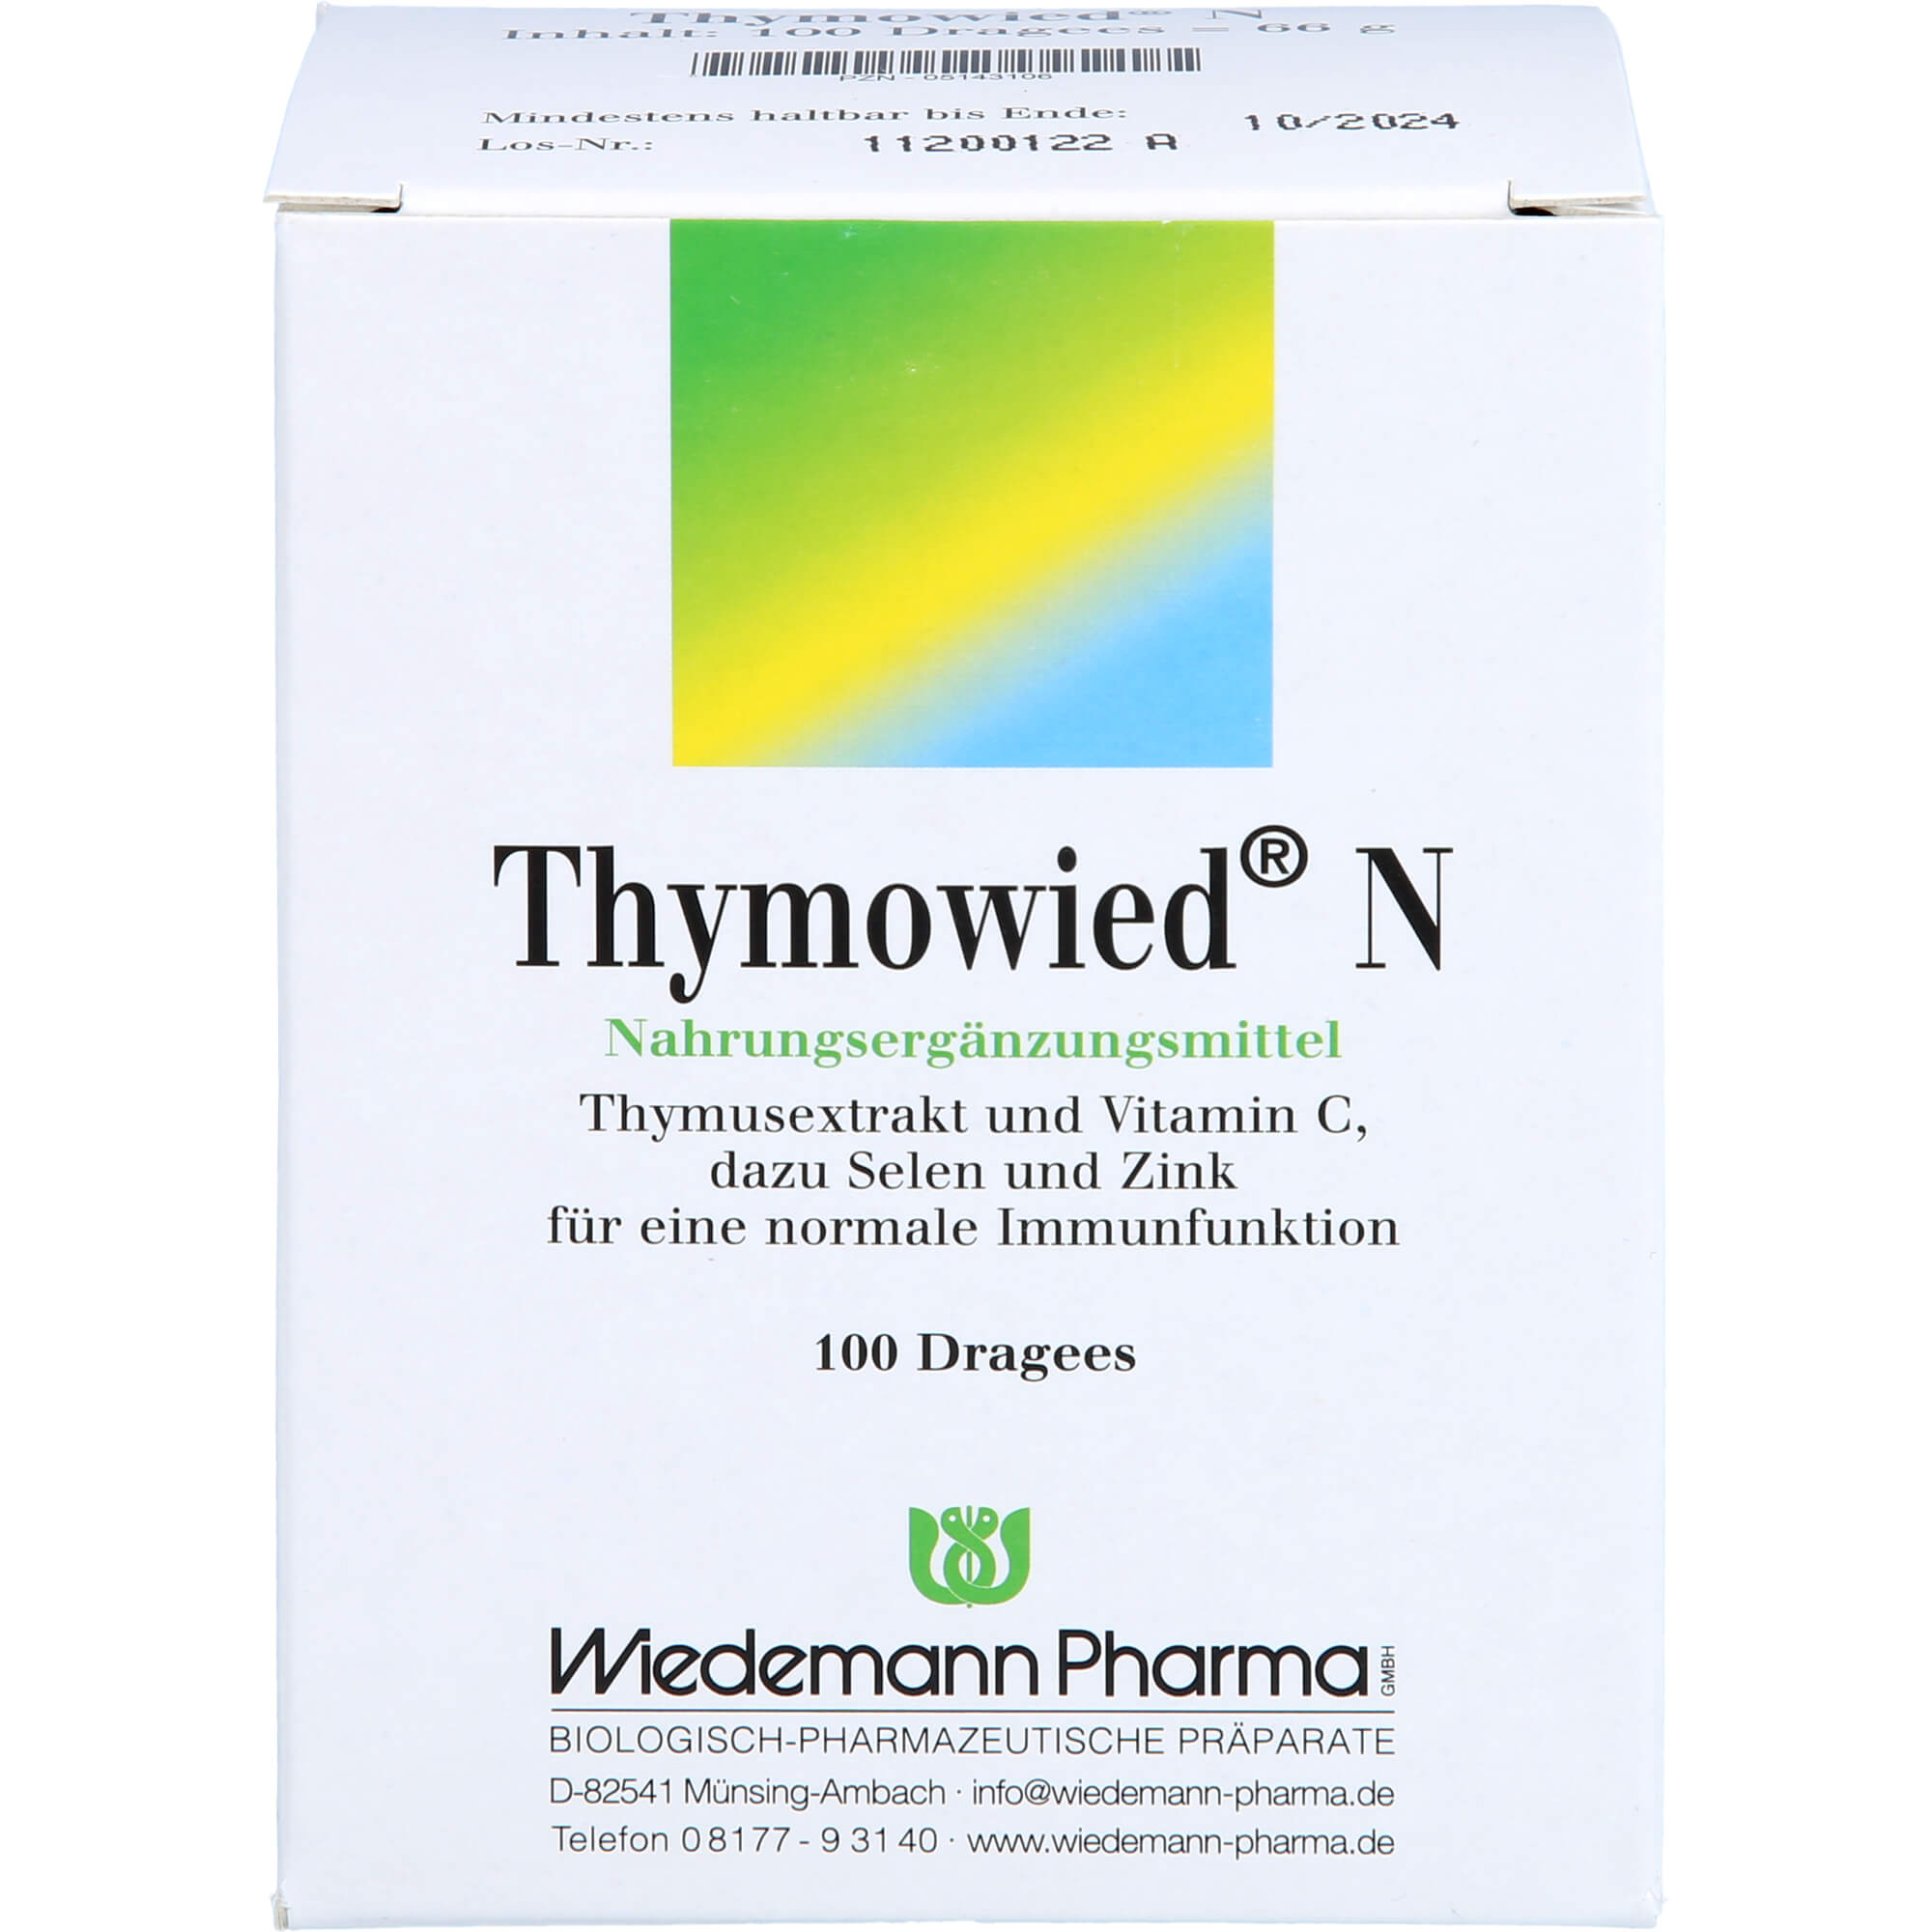 THYMOWIED N Dragees